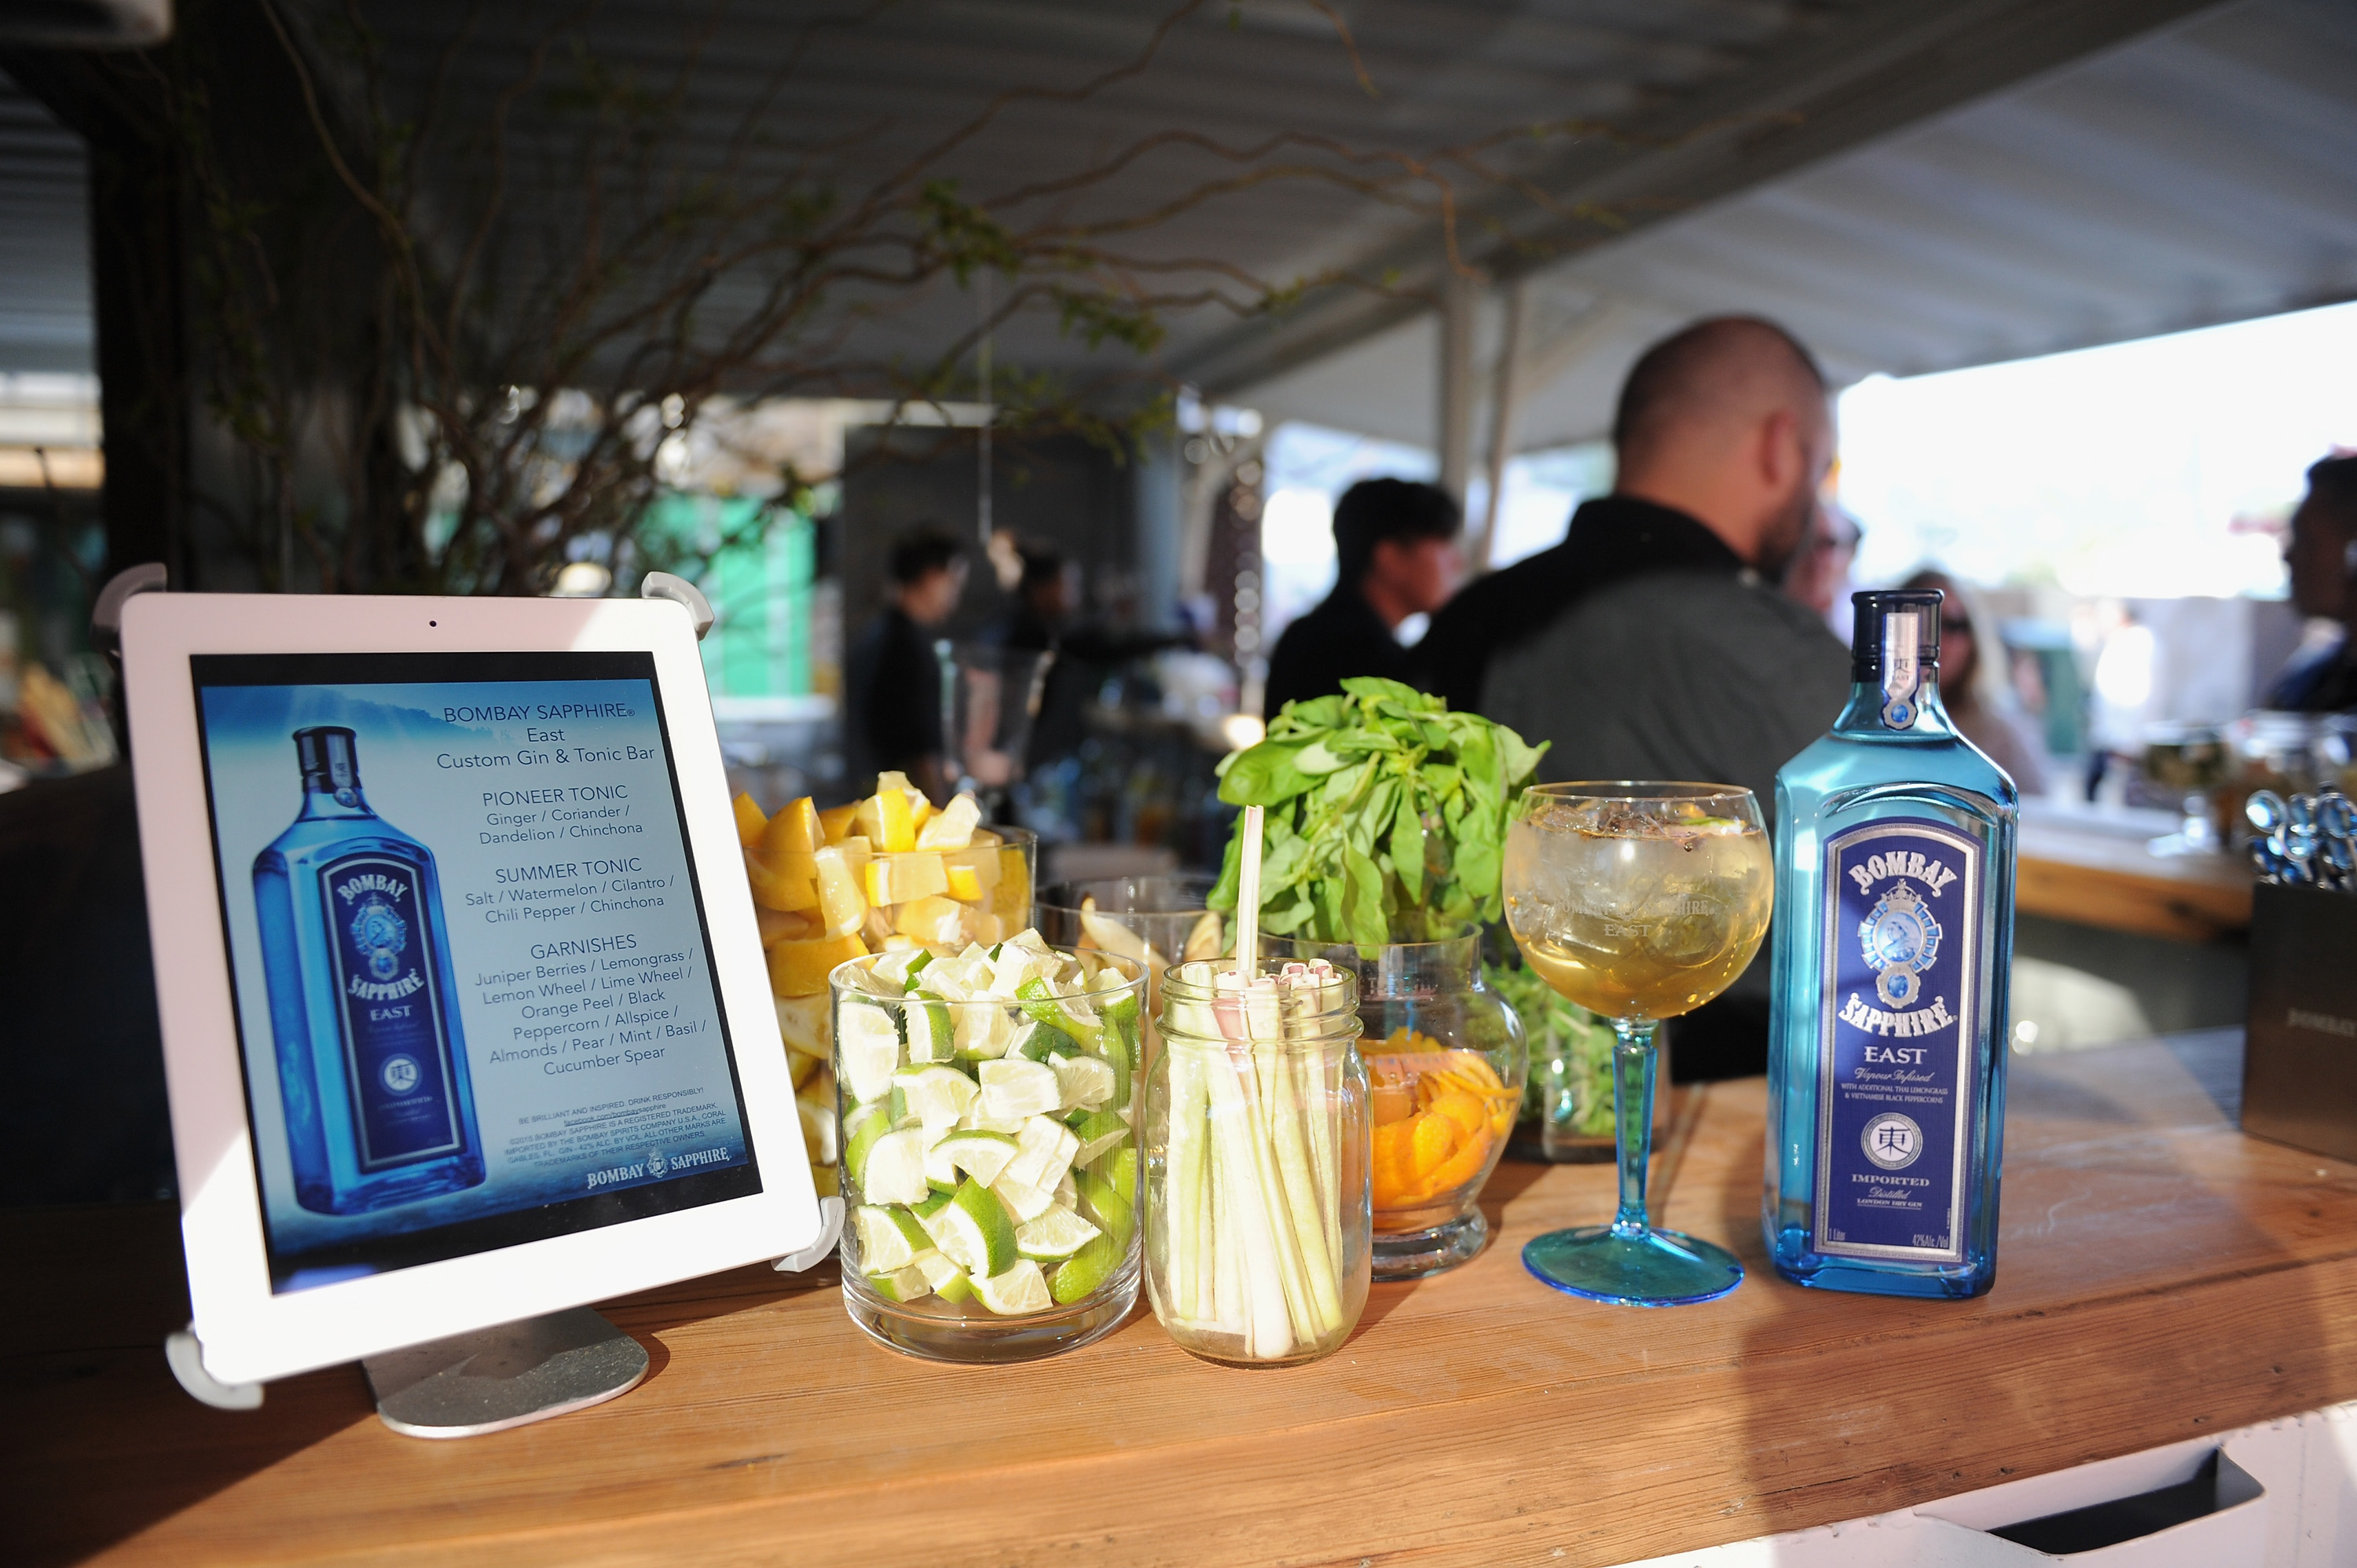 NEW YORK, NY - MAY 03:  A general view of atmosphere at Pioneer Works 2nd Annual Village Fete presented by BOMBAY SAPPHIRE GIN at Pioneer Works Center for Art + Innovation on May 3, 2015 in New York City.  (Photo by Craig Barritt/Getty Images for BOMBAY SAPPHIRE GIN)